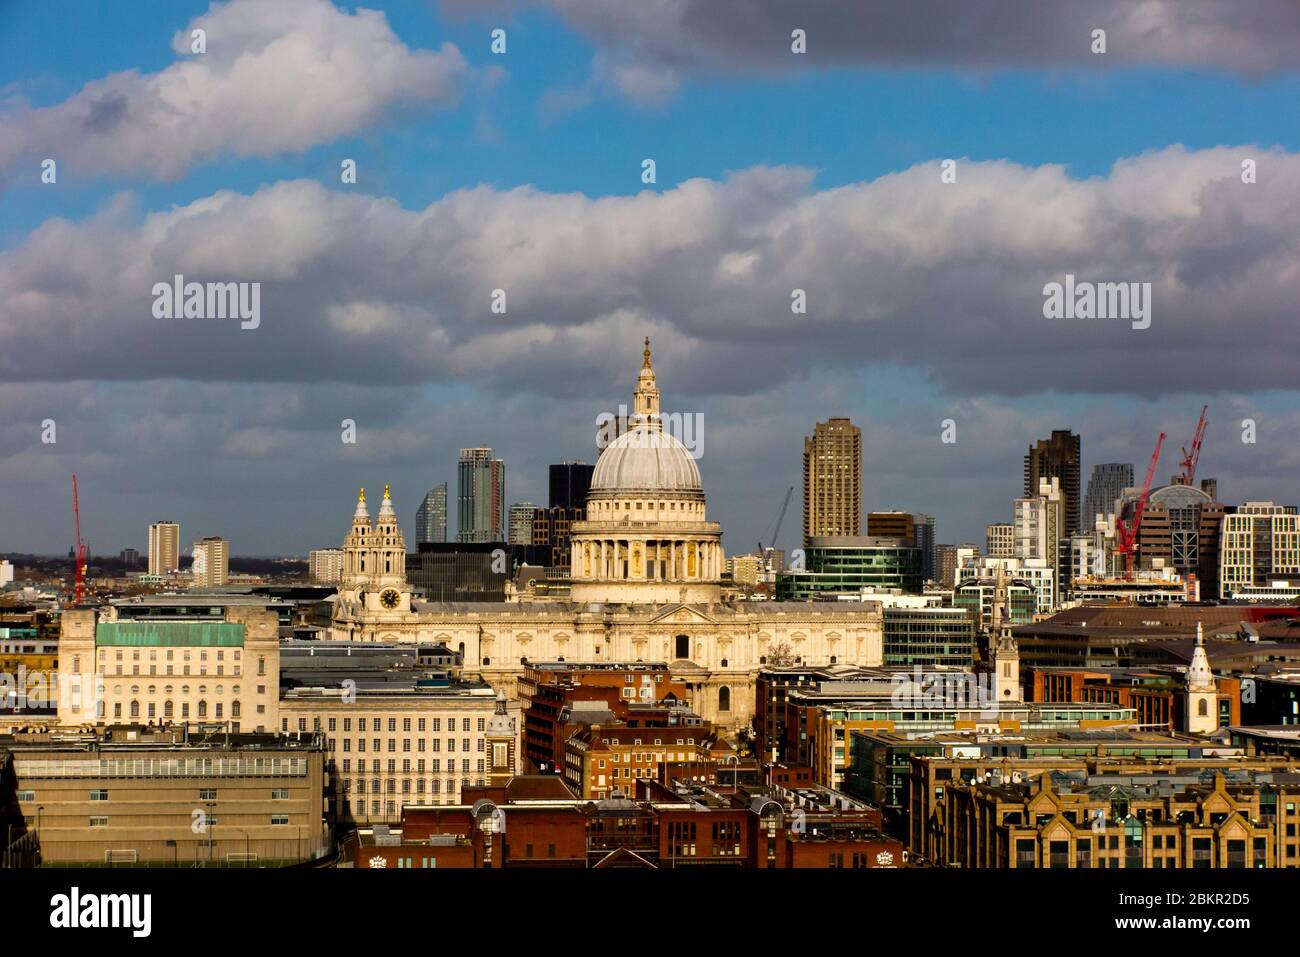 View of St Paul's Cathedral in the City of London England UK designed by Sir Christopher Wren in the late 17th century in English baroque style. Stock Photo